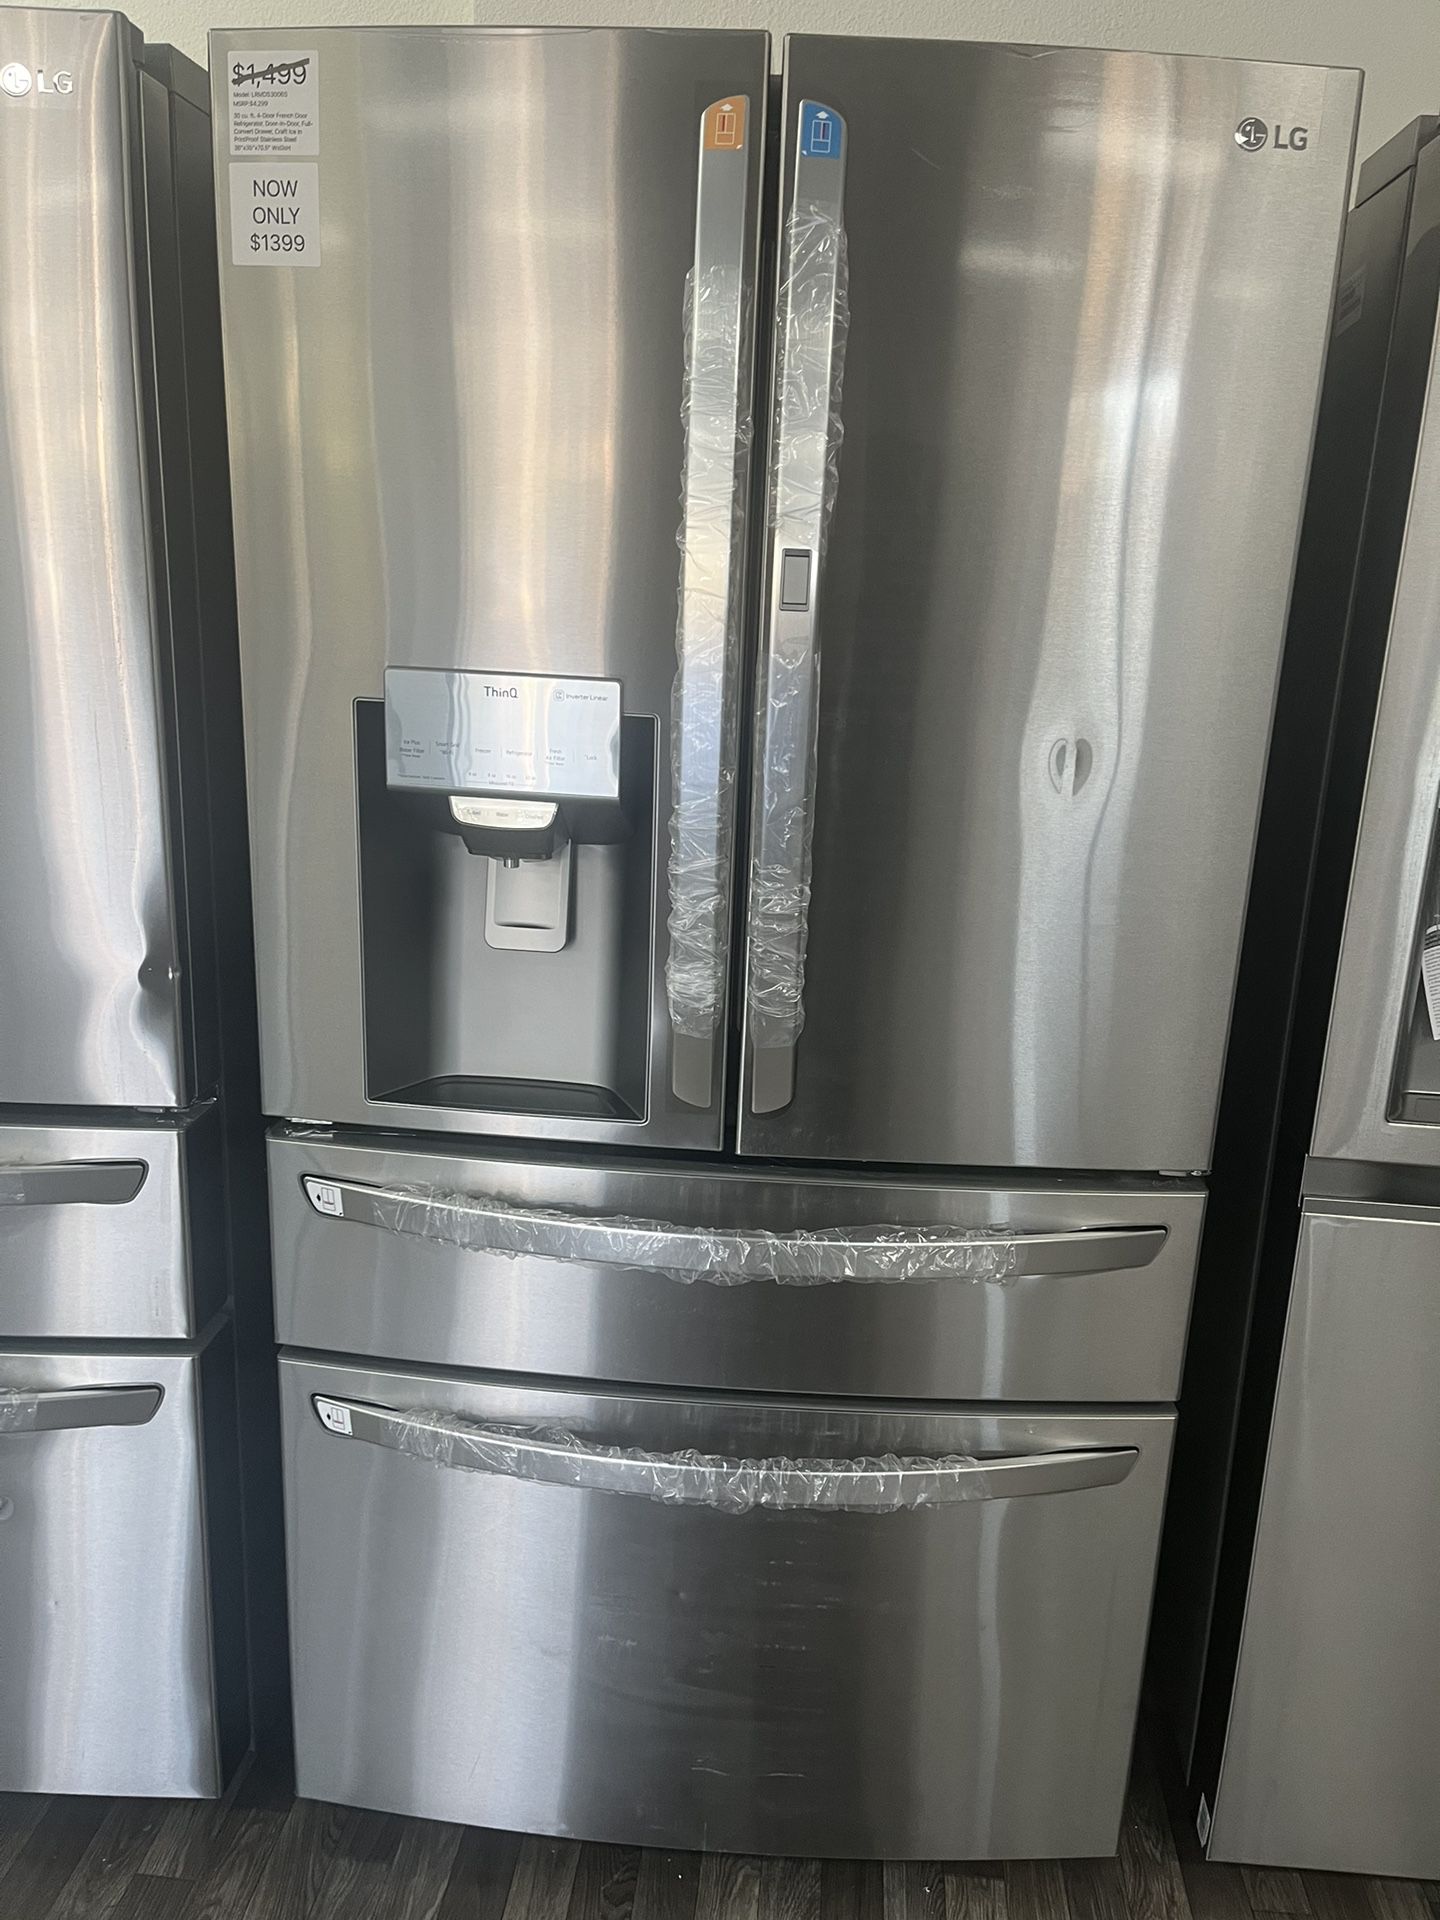 Final Sale / Large Capacity Refrigerator Was$4299 Now$1399  Never Used 